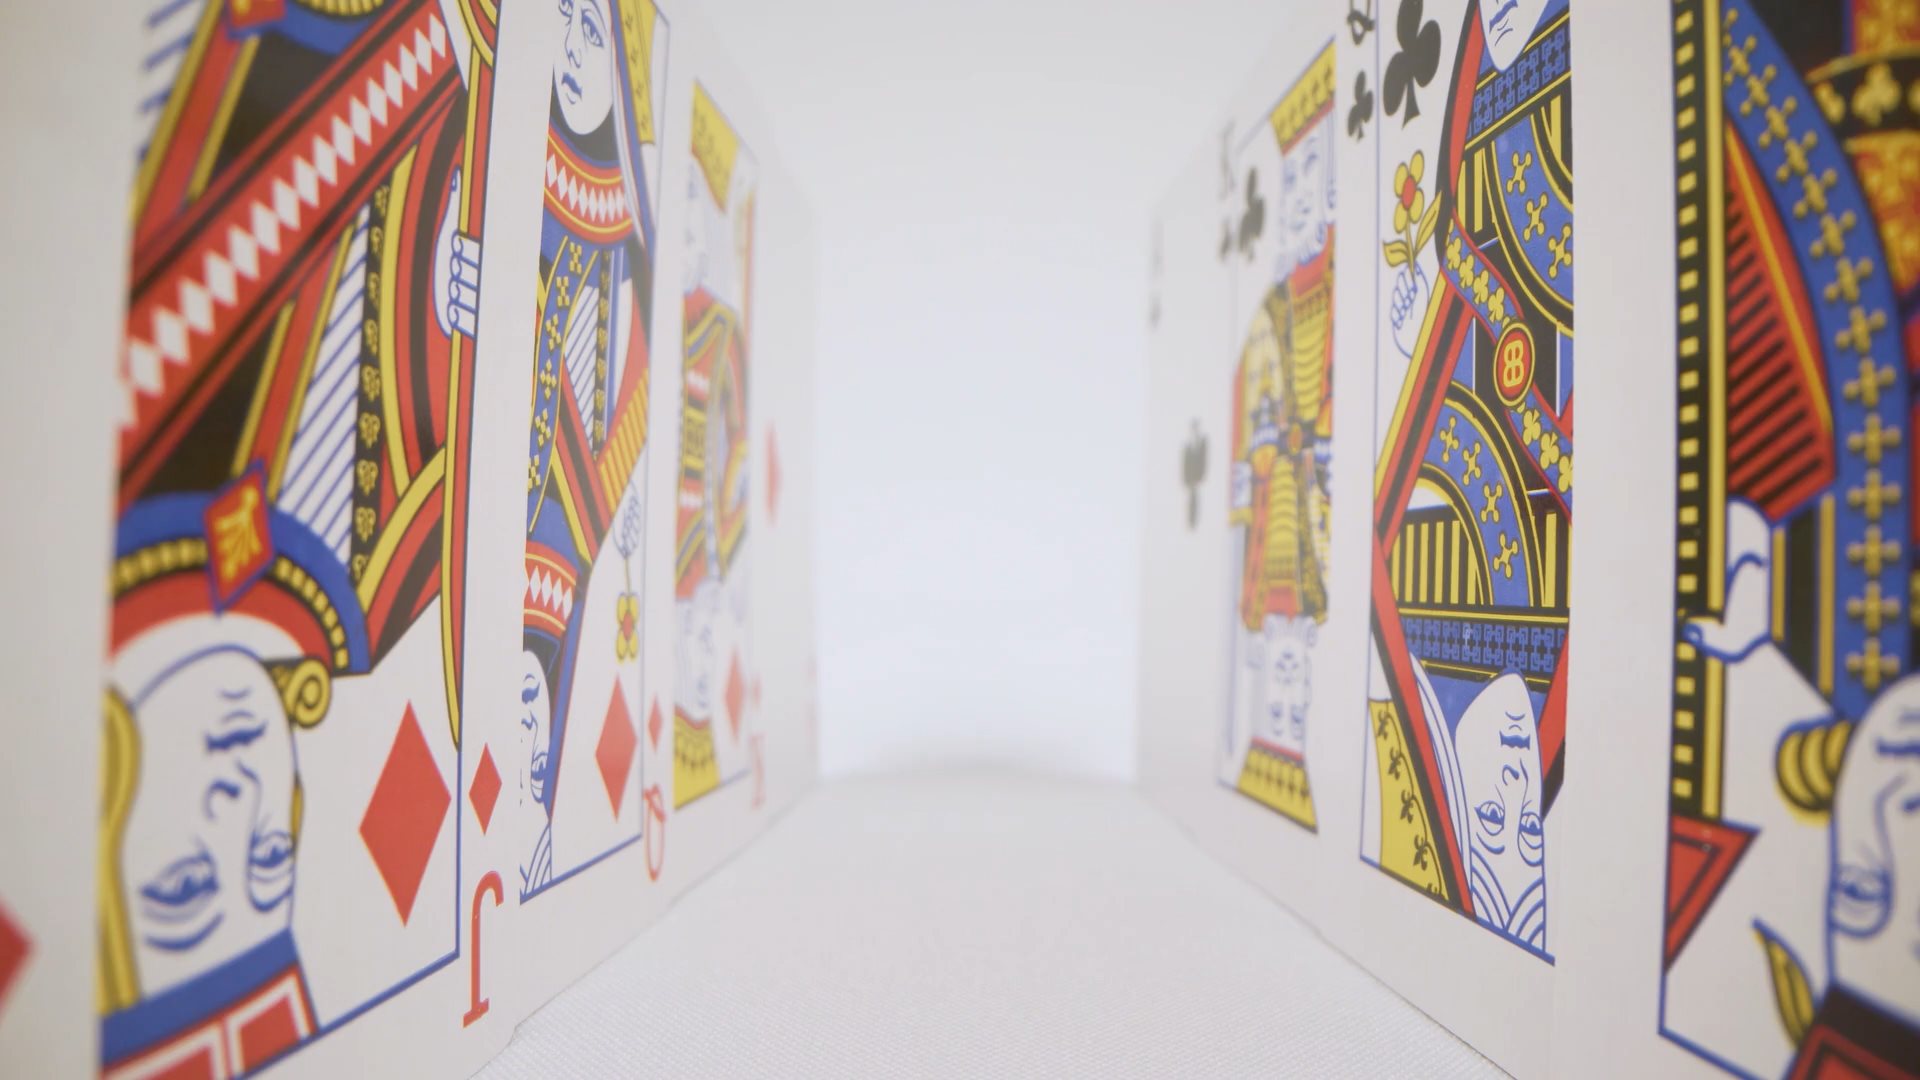 Video of playing cards entering into view like a tunnel